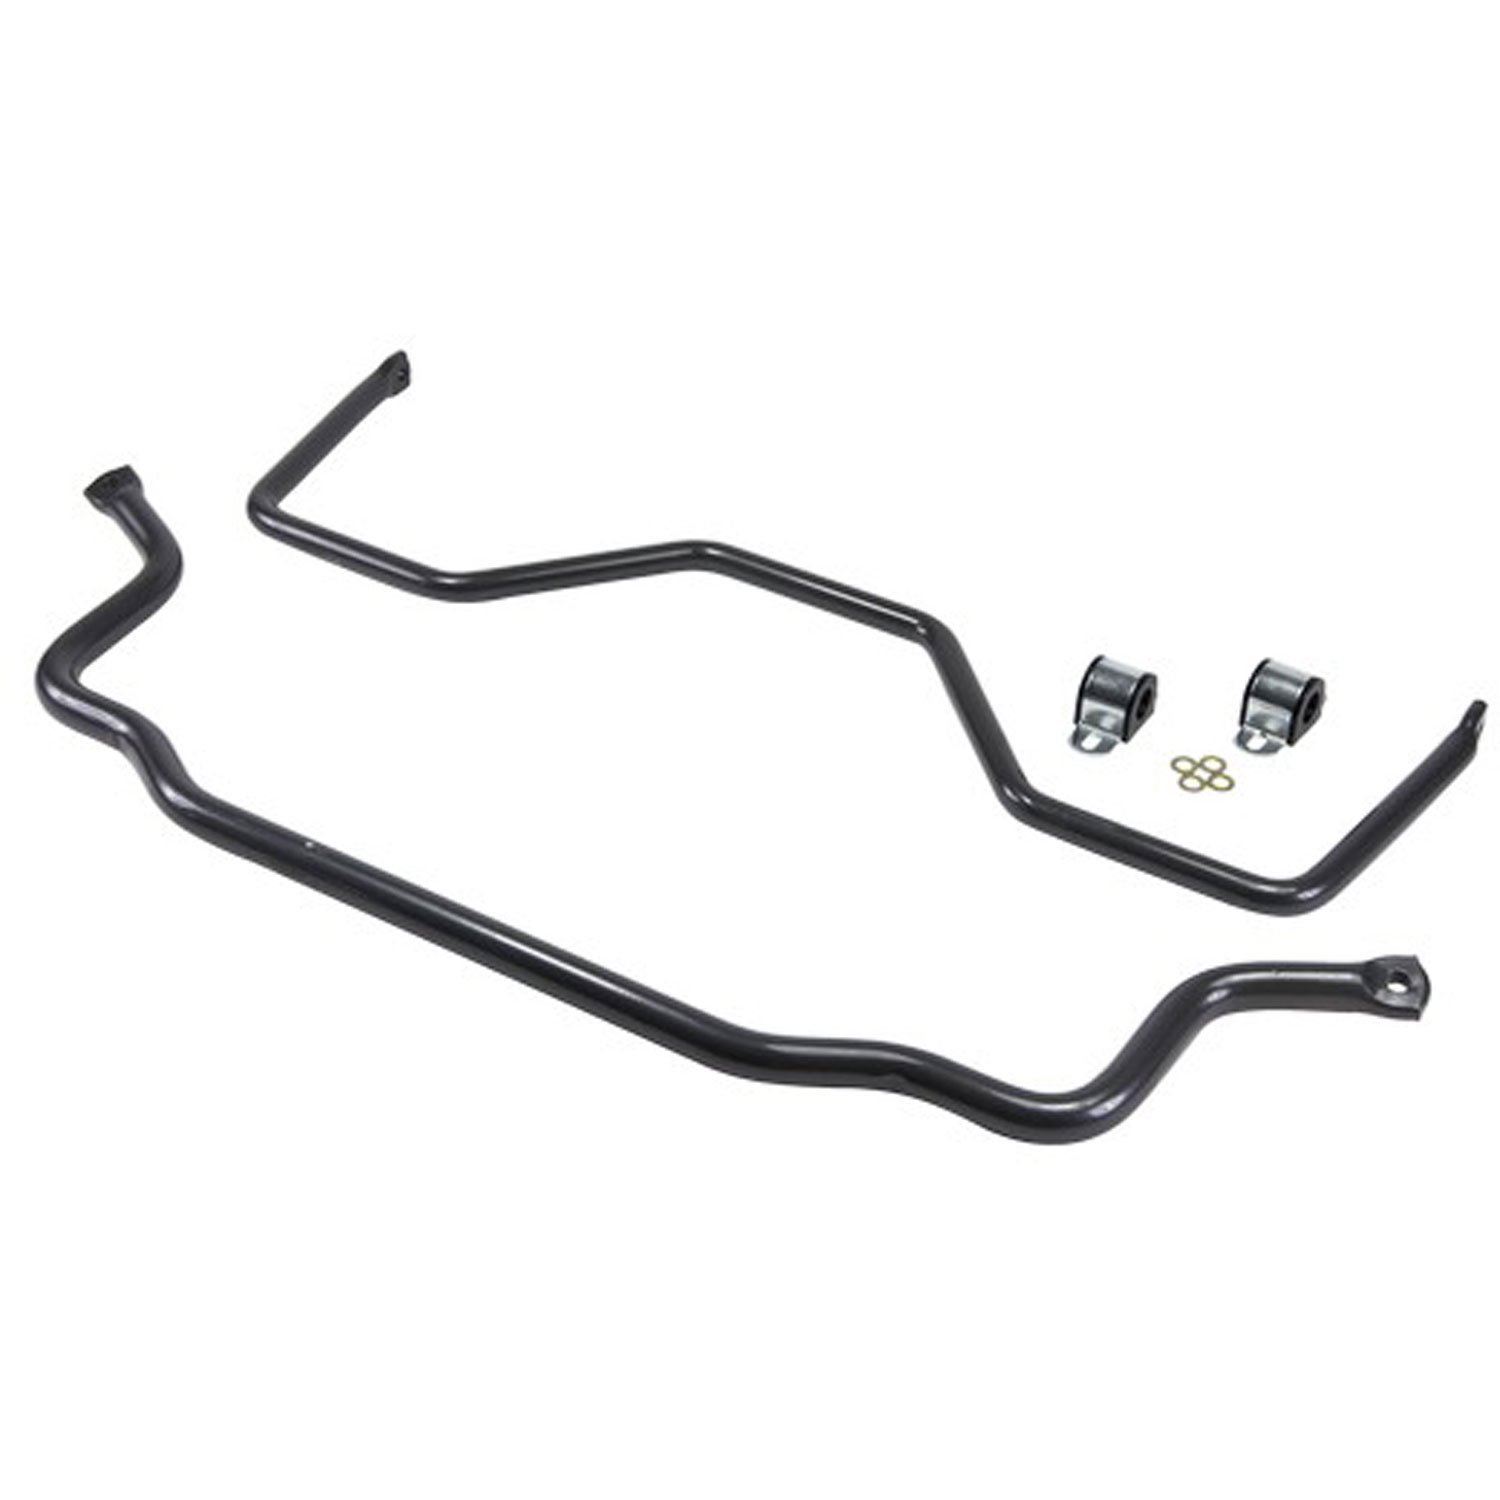 Front/Rear Sway Bar Kit for 2007-2015 Chevy